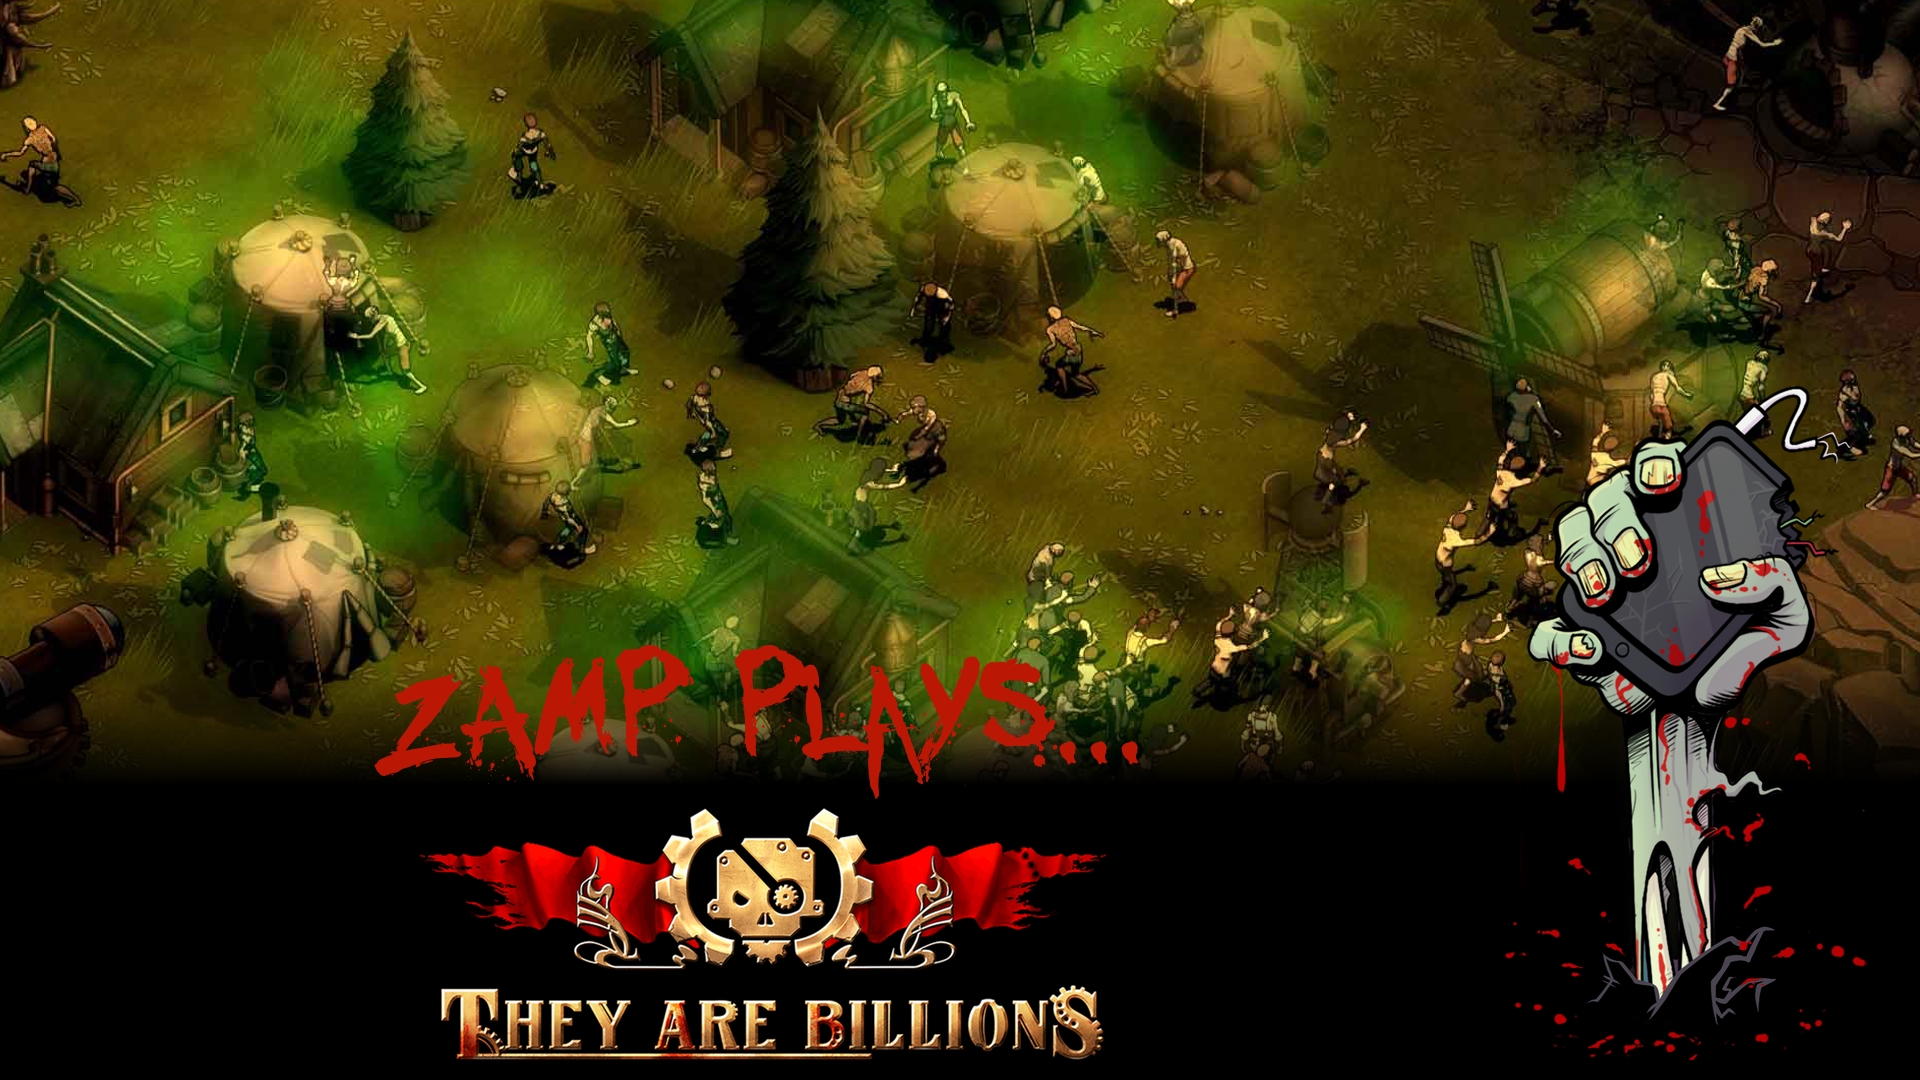 They Are Billions Hd Wallpaper Hd - They Are Billion Oil , HD Wallpaper & Backgrounds